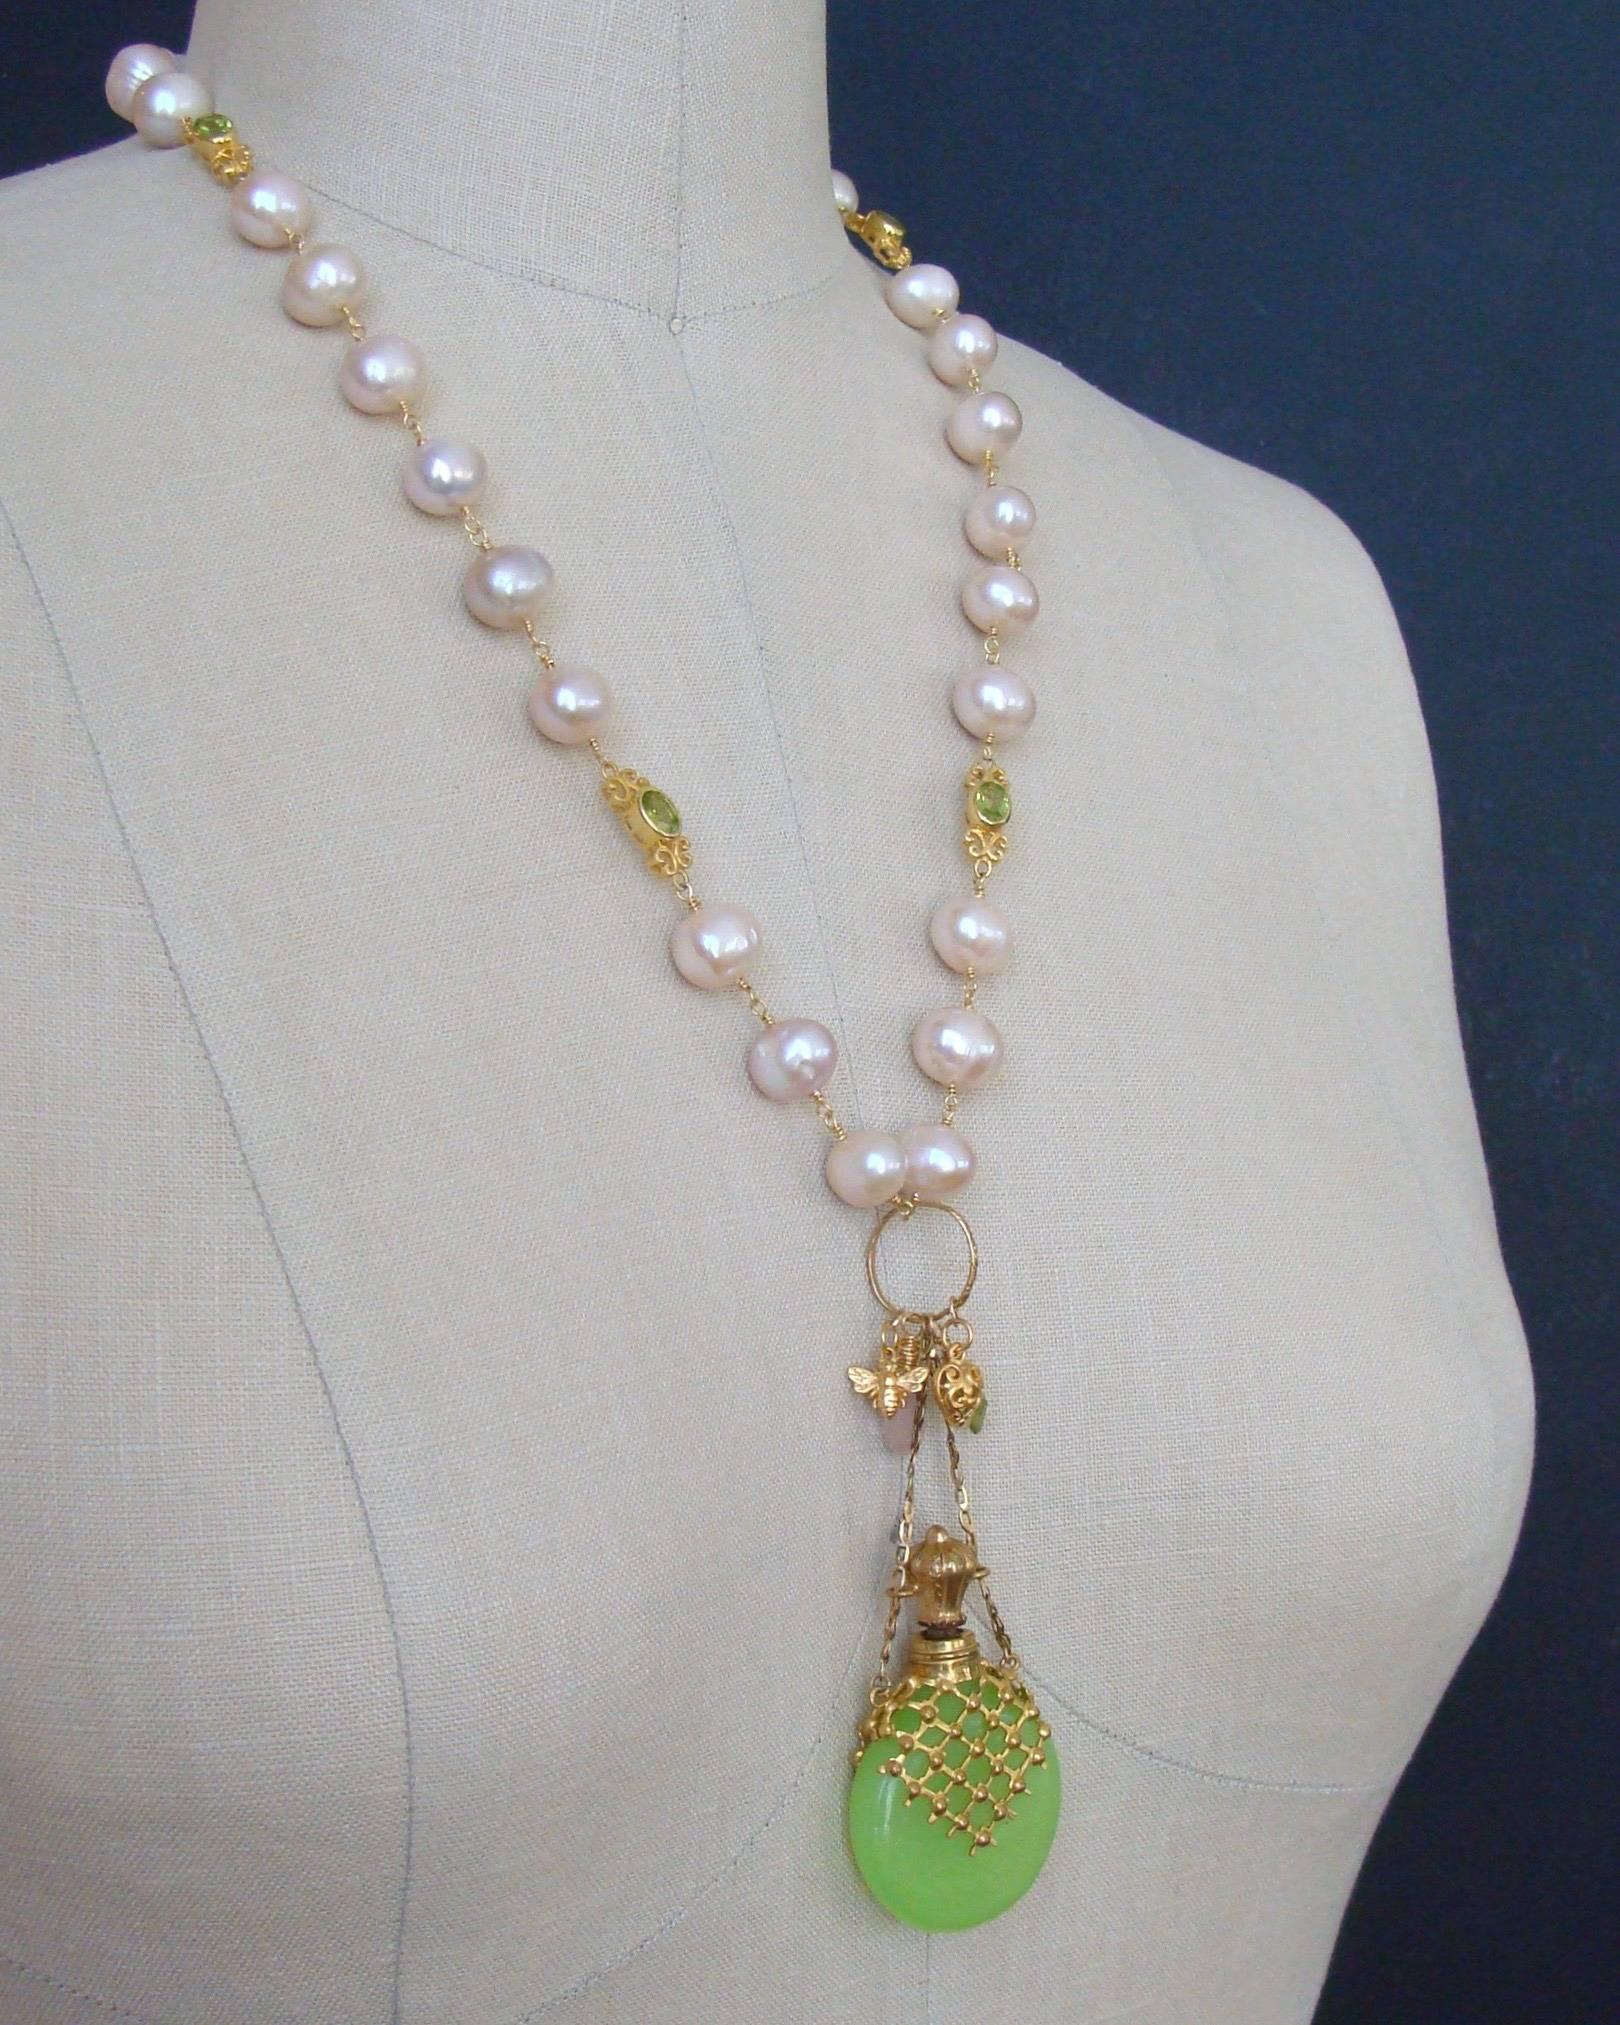 Kiwi Green Opaline Pink Baroque Pearls Peridot Chatelaine Scent Bottle Necklace  1